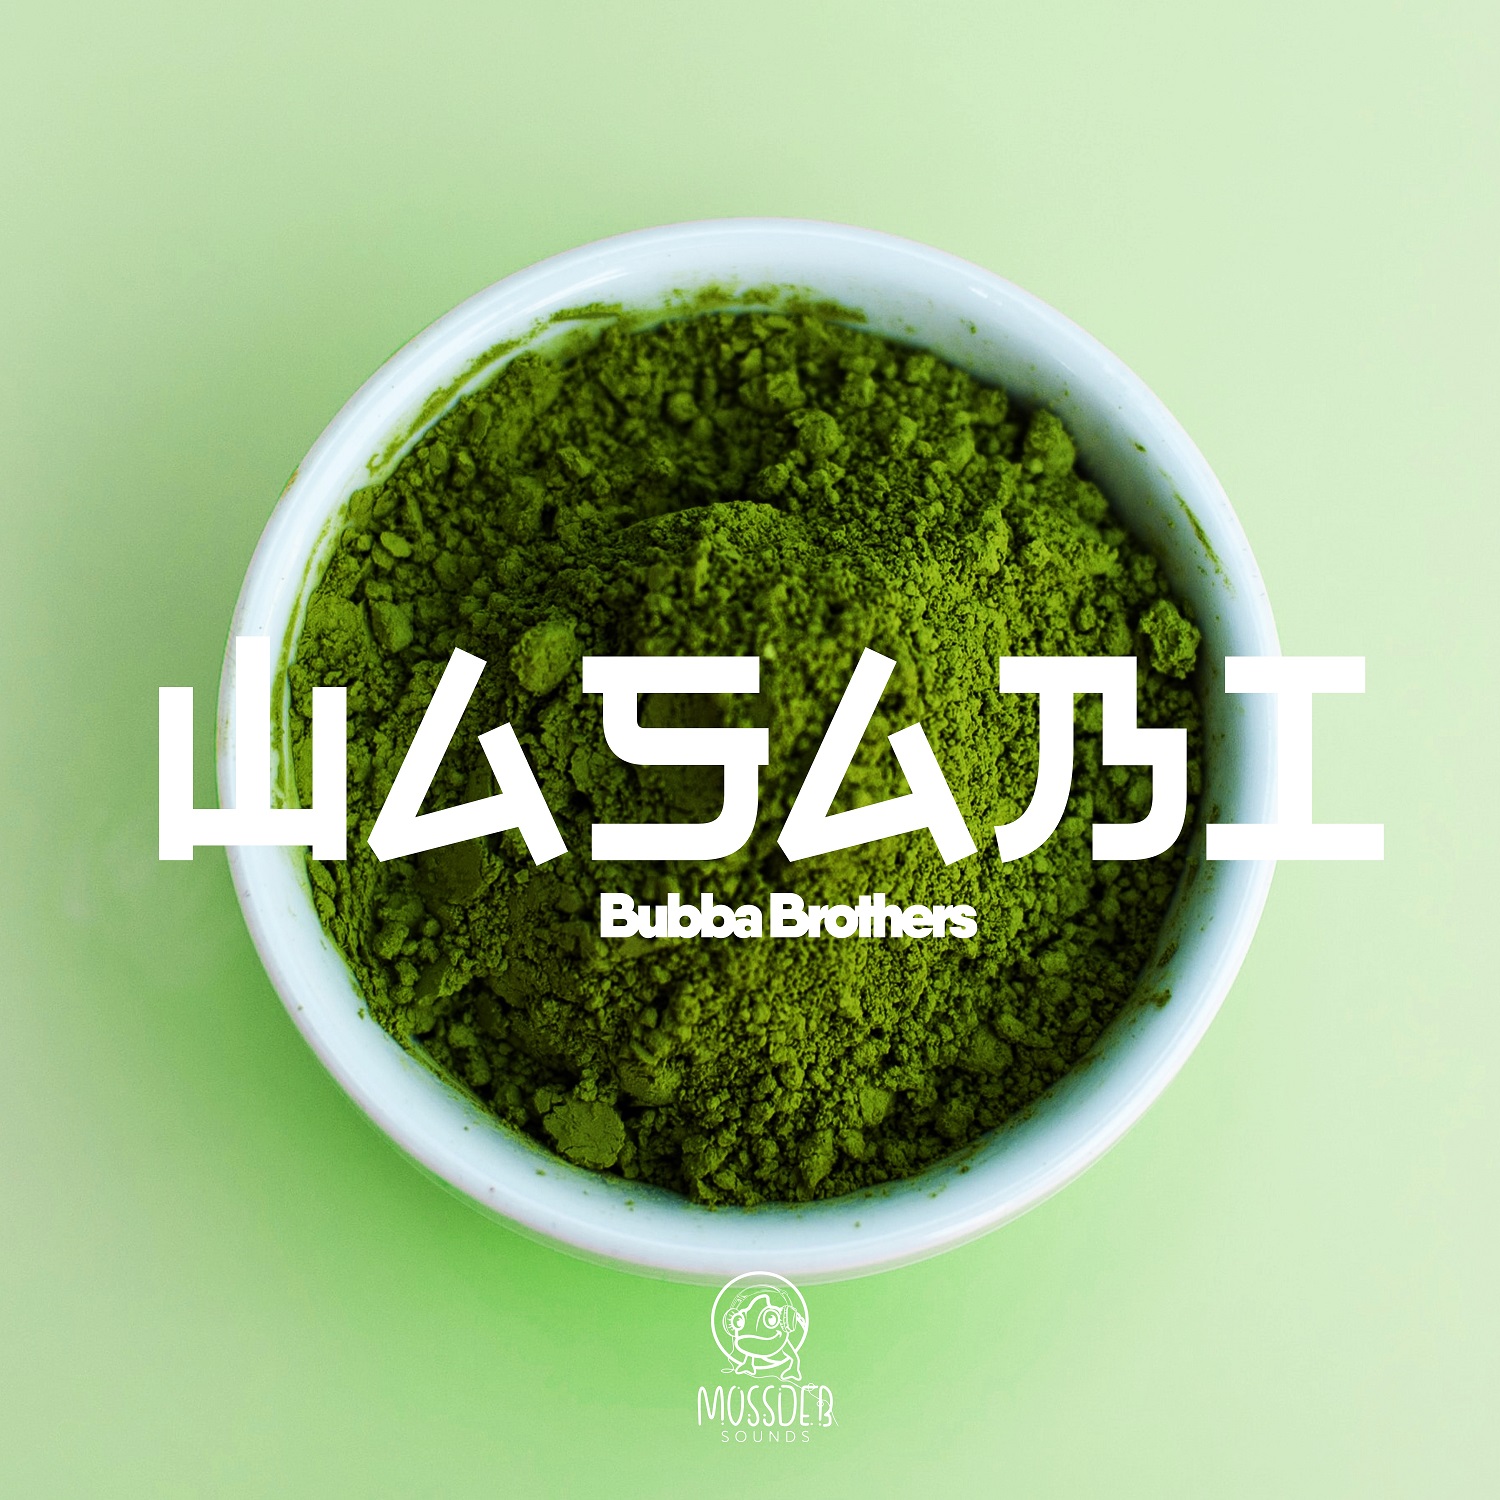 Bubba Brothers Strike Again with Their Unmissable New House Gem “Wasabi”